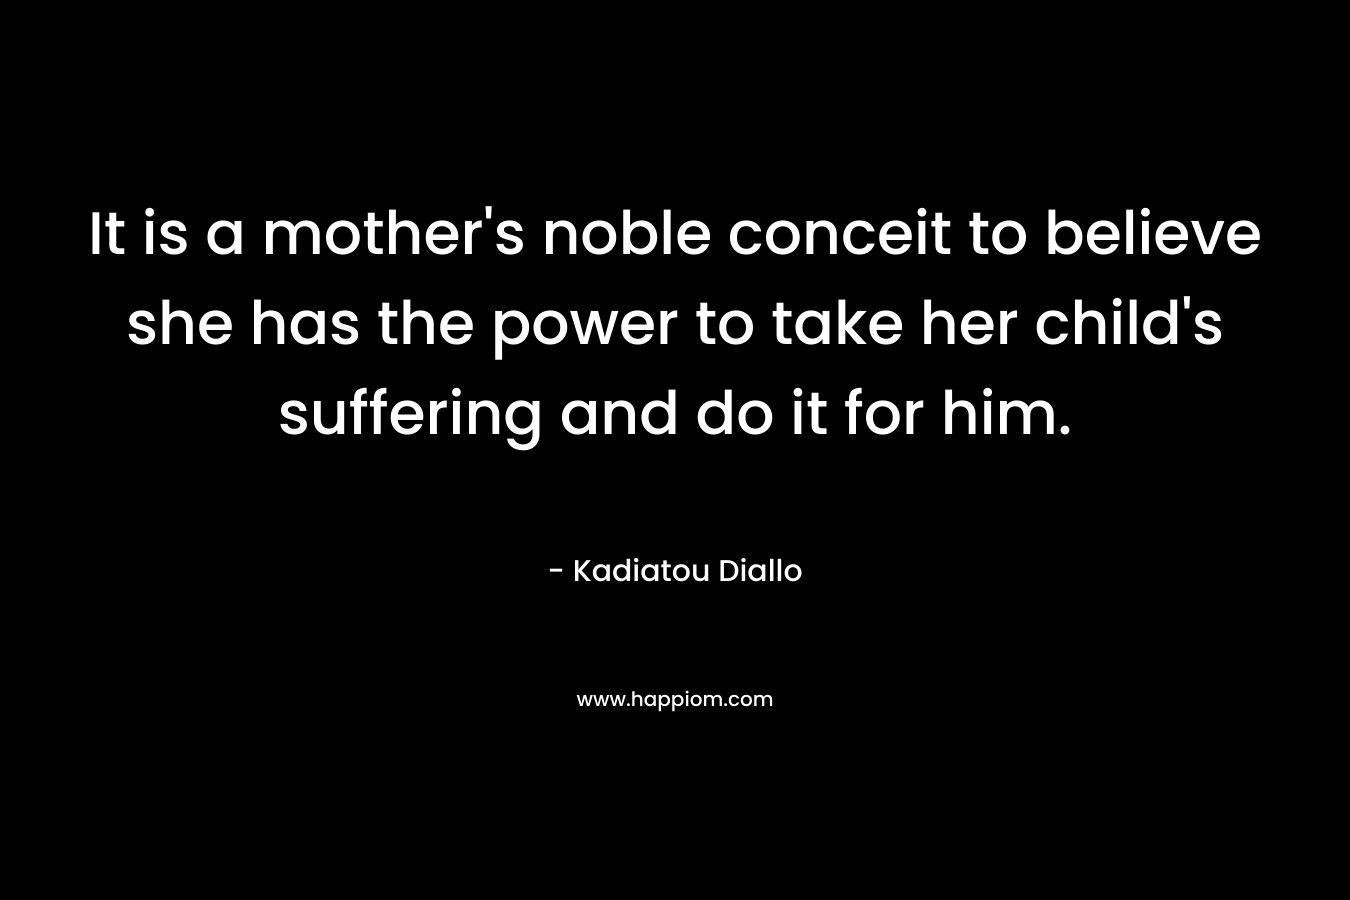 It is a mother's noble conceit to believe she has the power to take her child's suffering and do it for him.